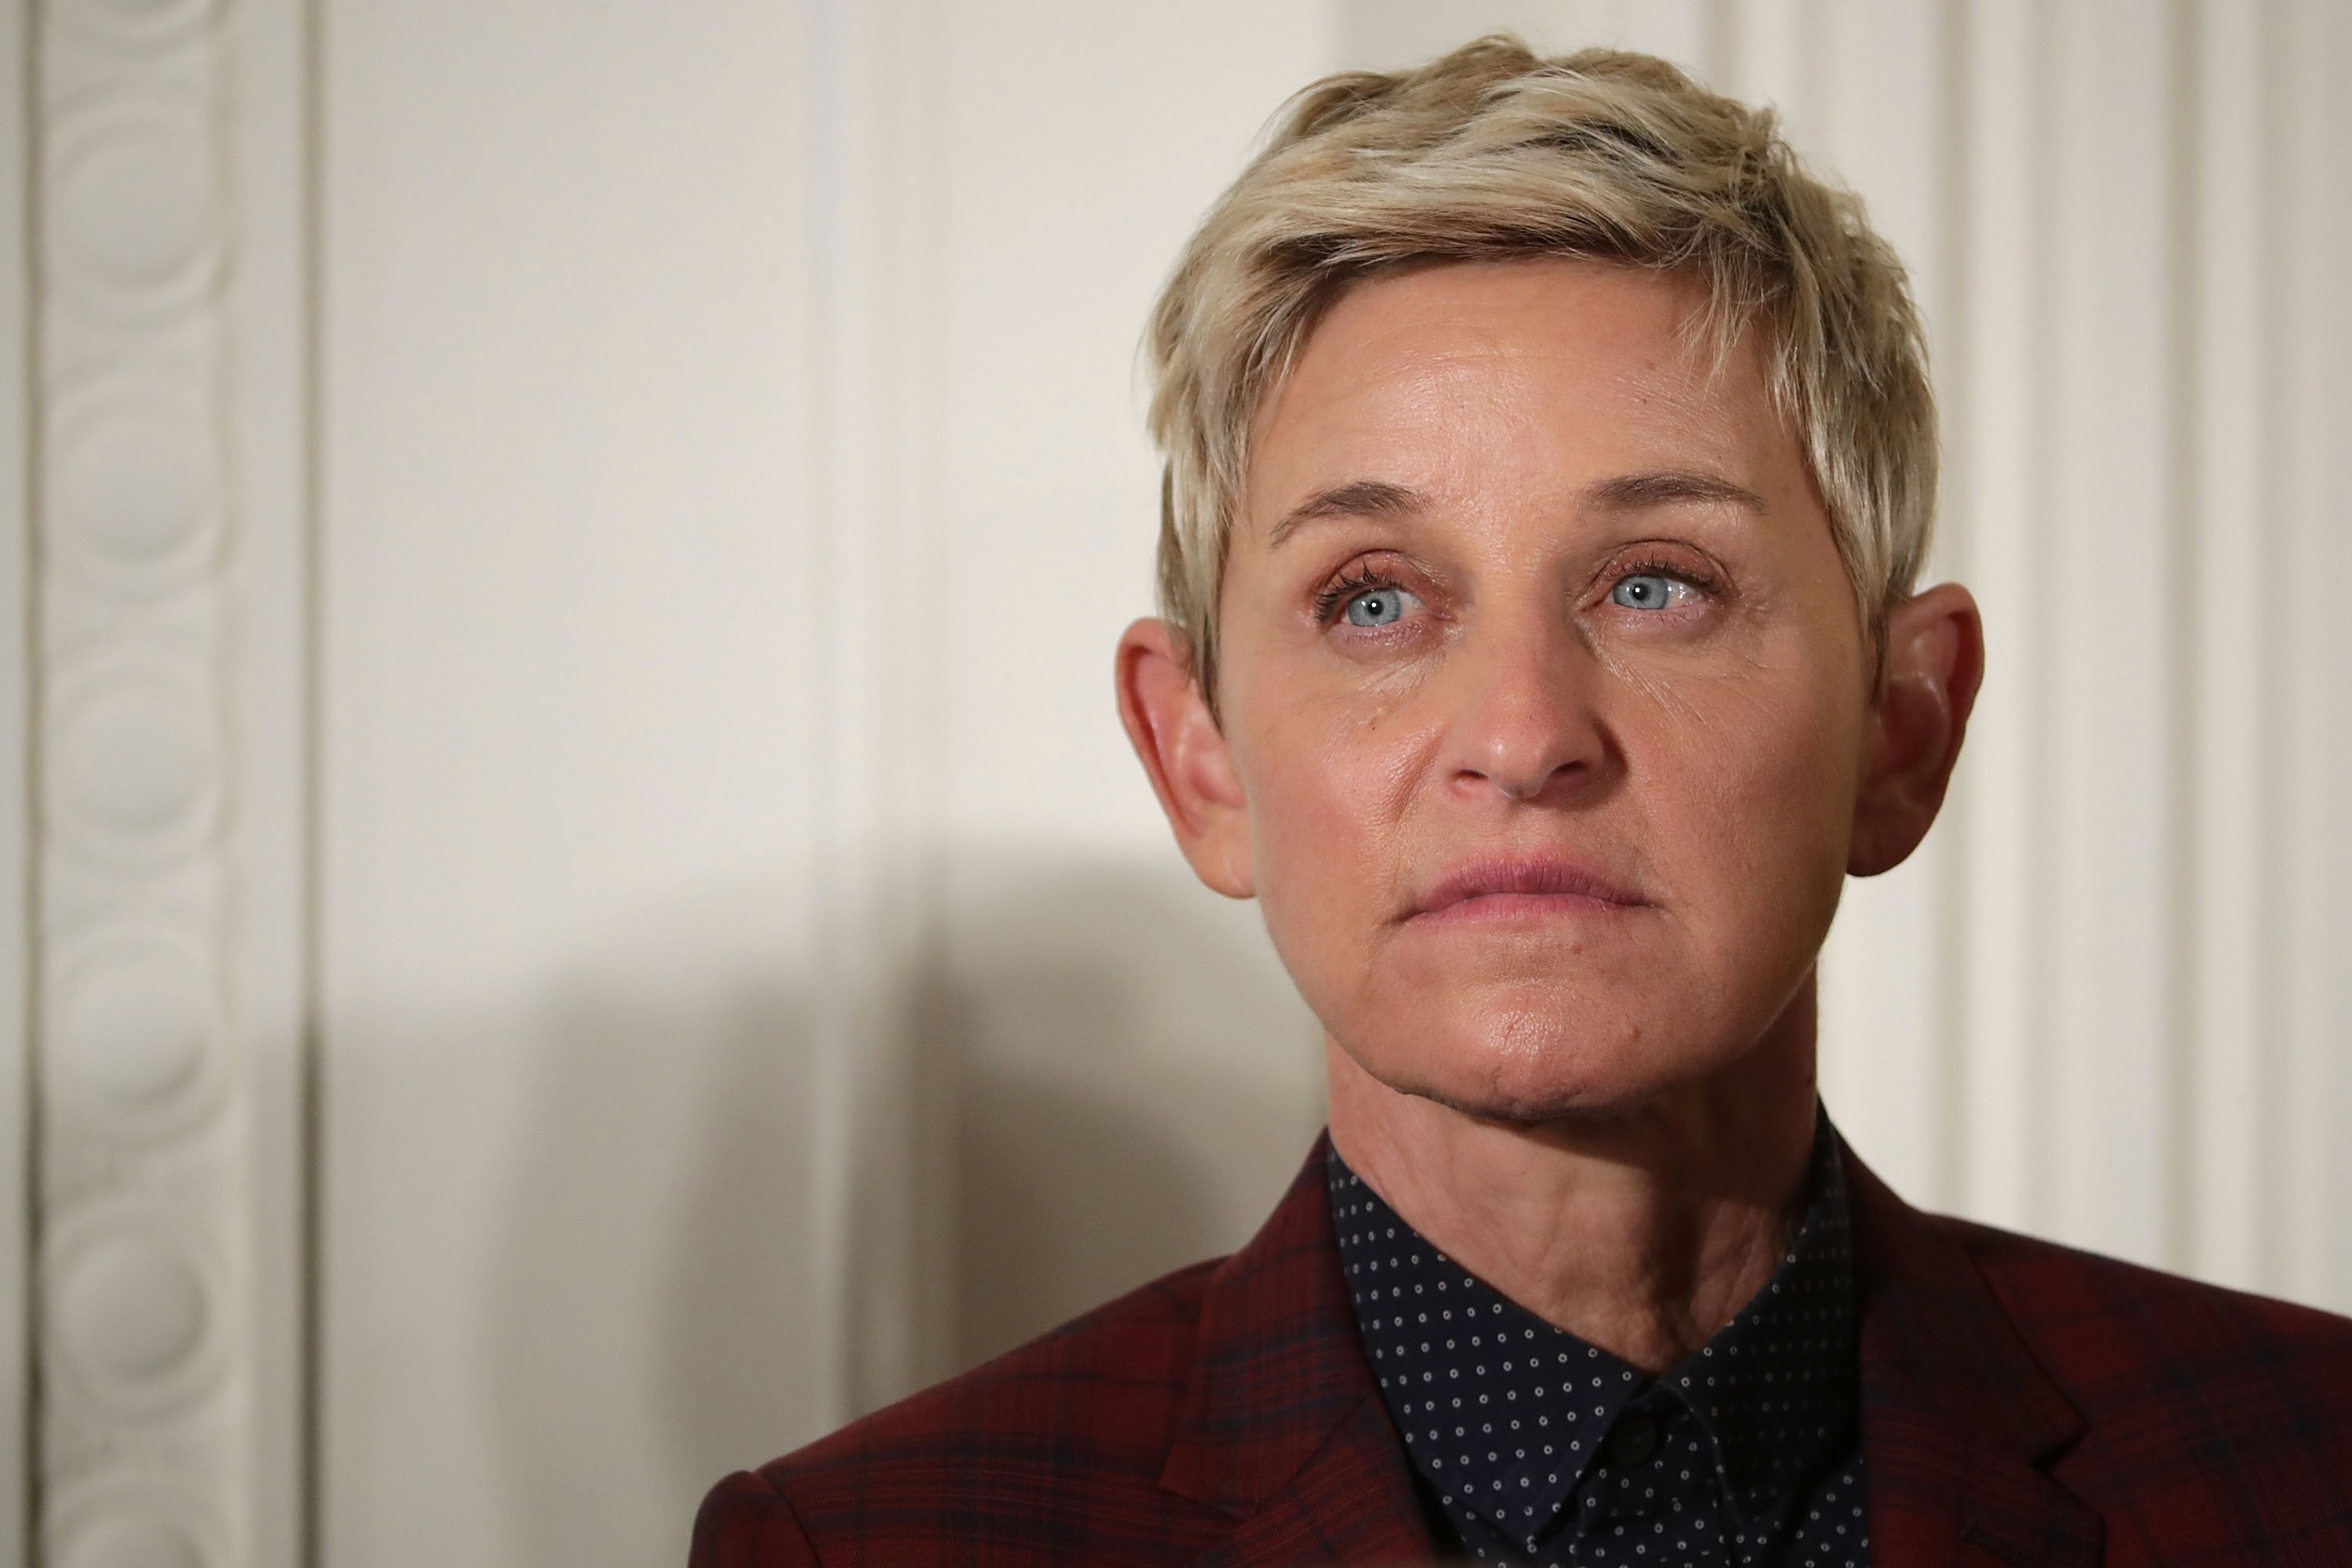 Ellen DeGeneres waits to receive the Presidential Medal of Freedom in Washington, DC on November 22, 2016. | Photo: Getty Images